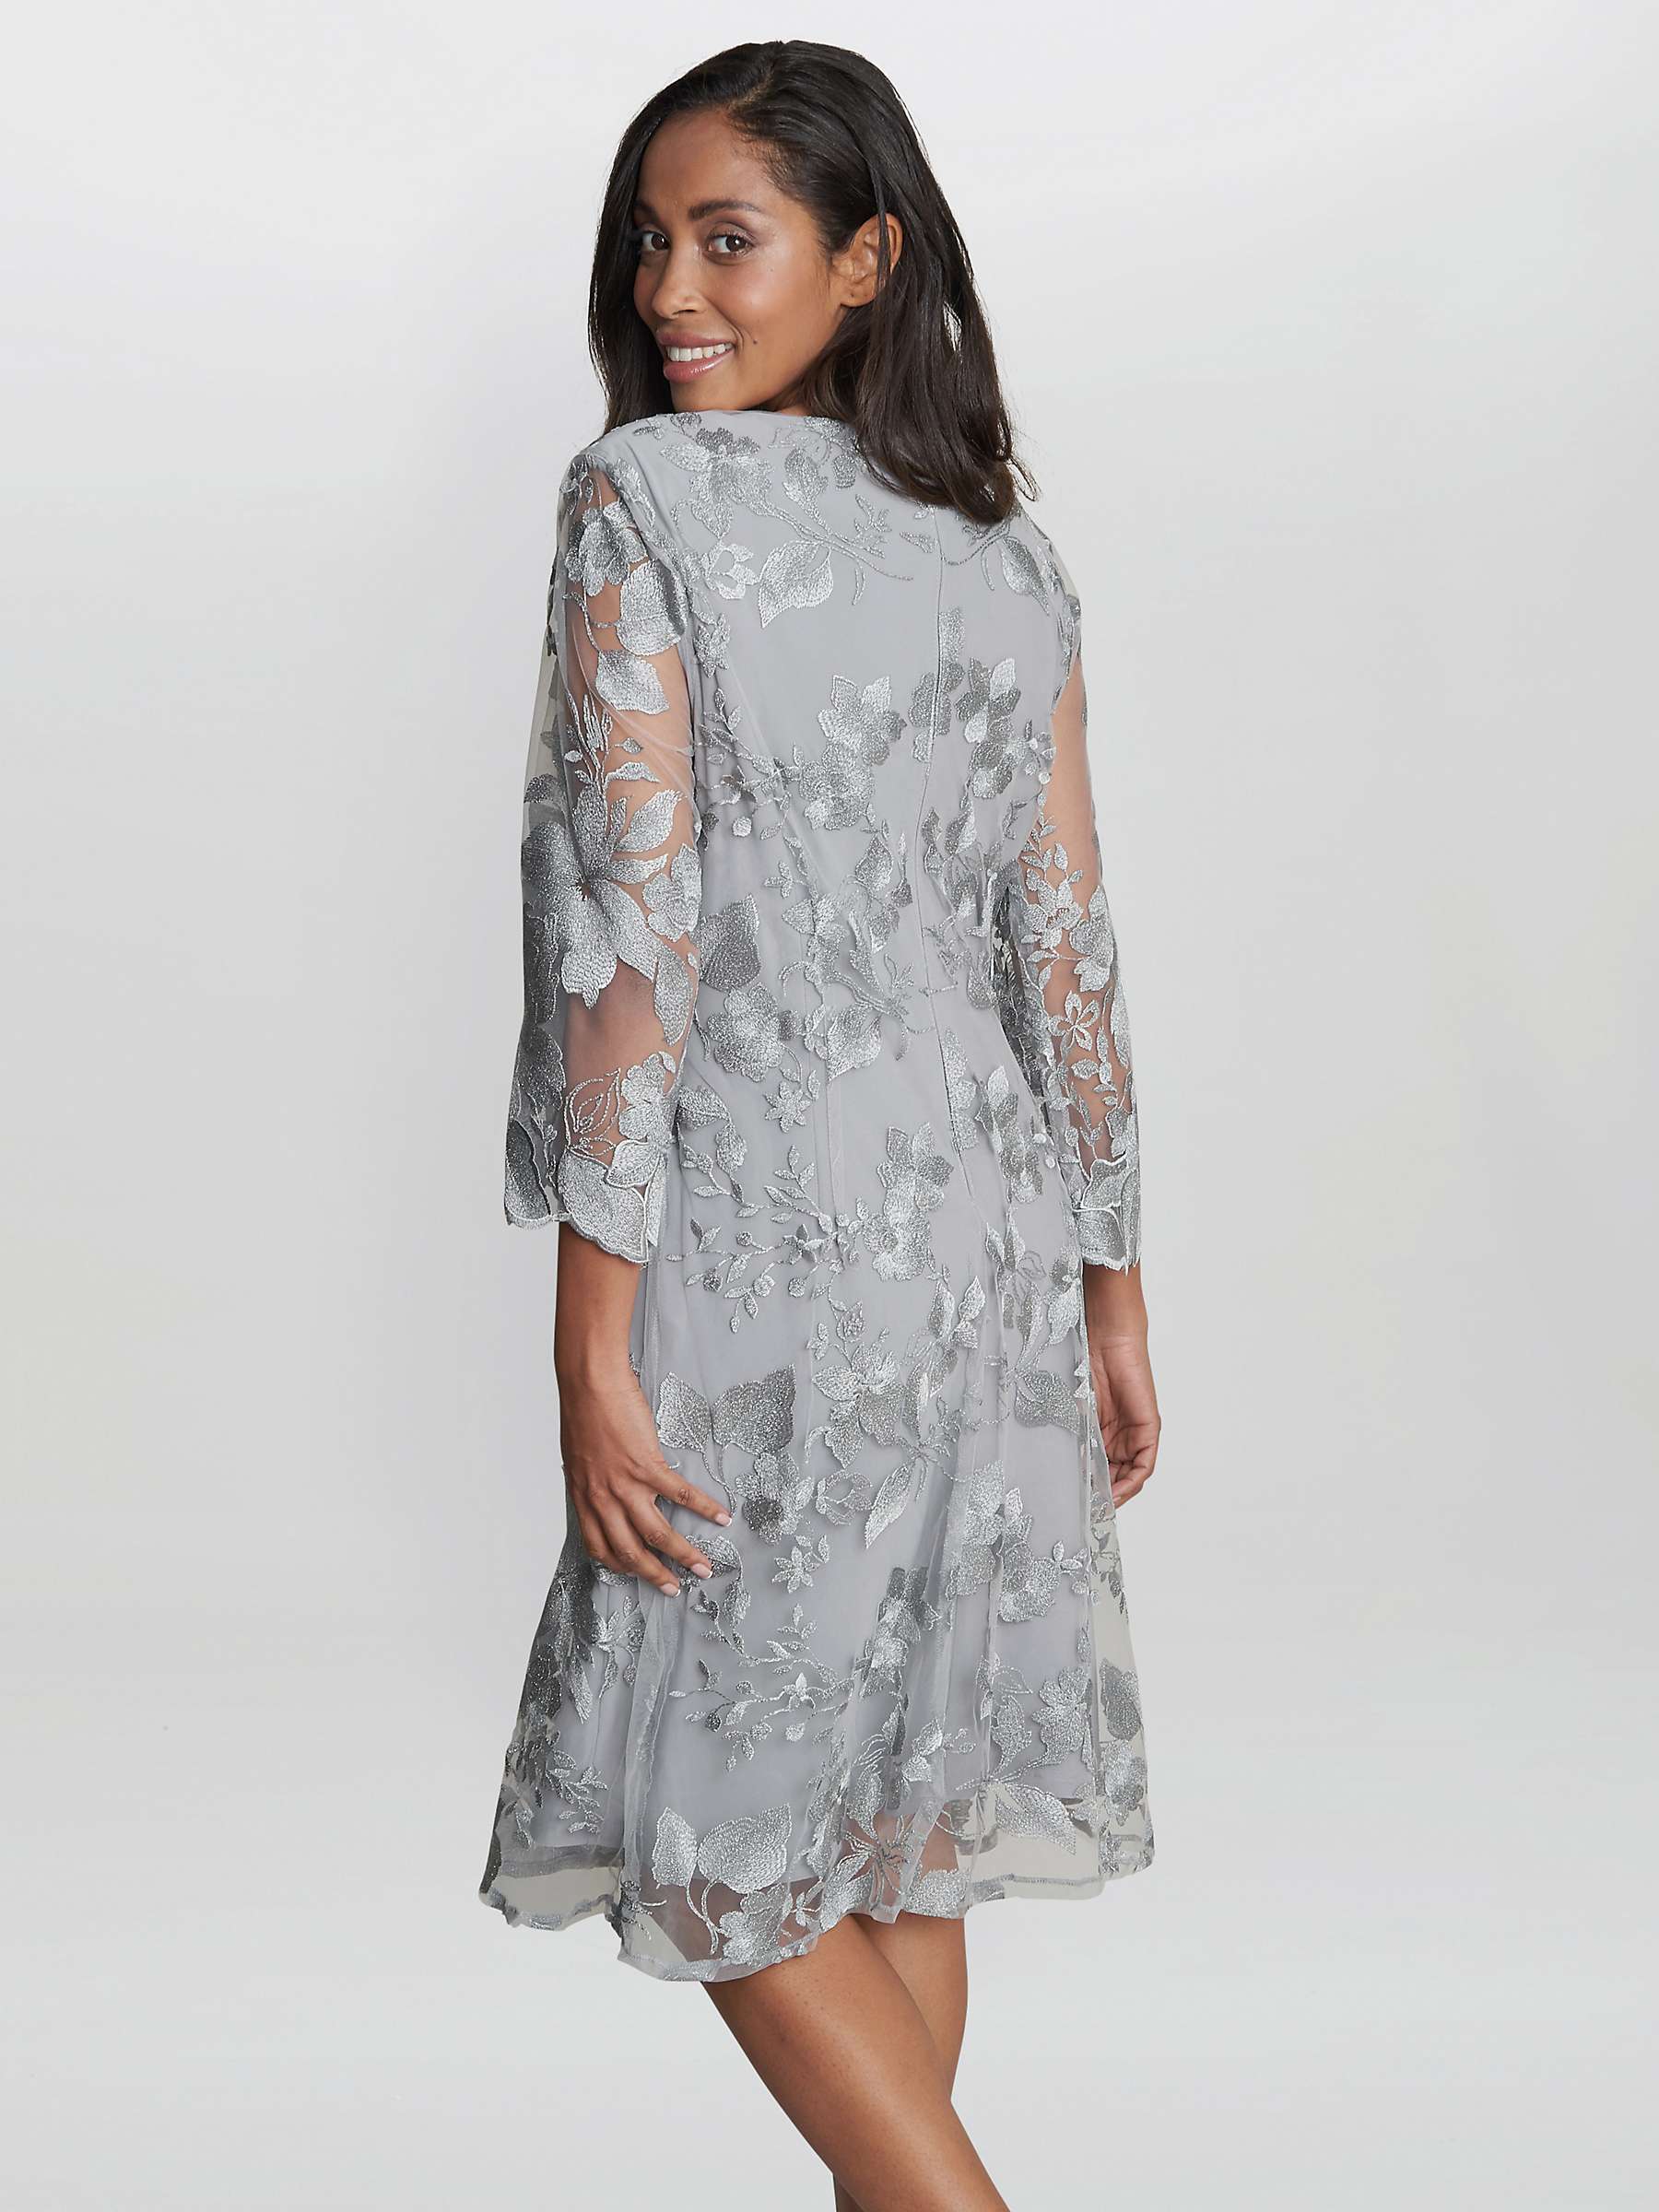 Buy Gina Bacconi Savoy Floral Embroidered Lace Mock Knee Length Dress Online at johnlewis.com